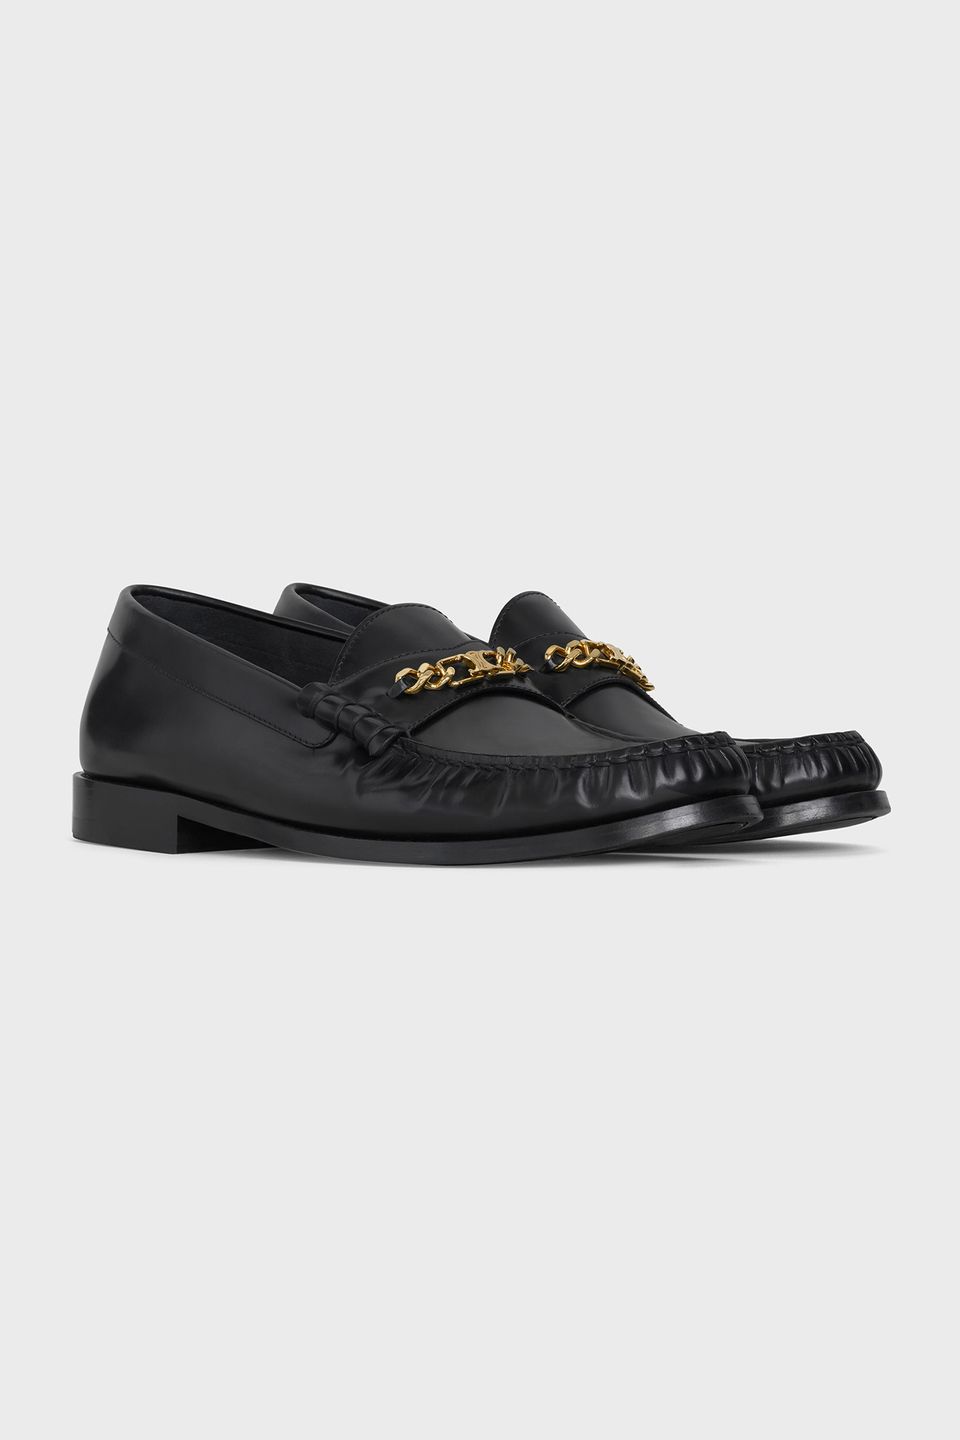 Luco Chain Triomphe Loafer